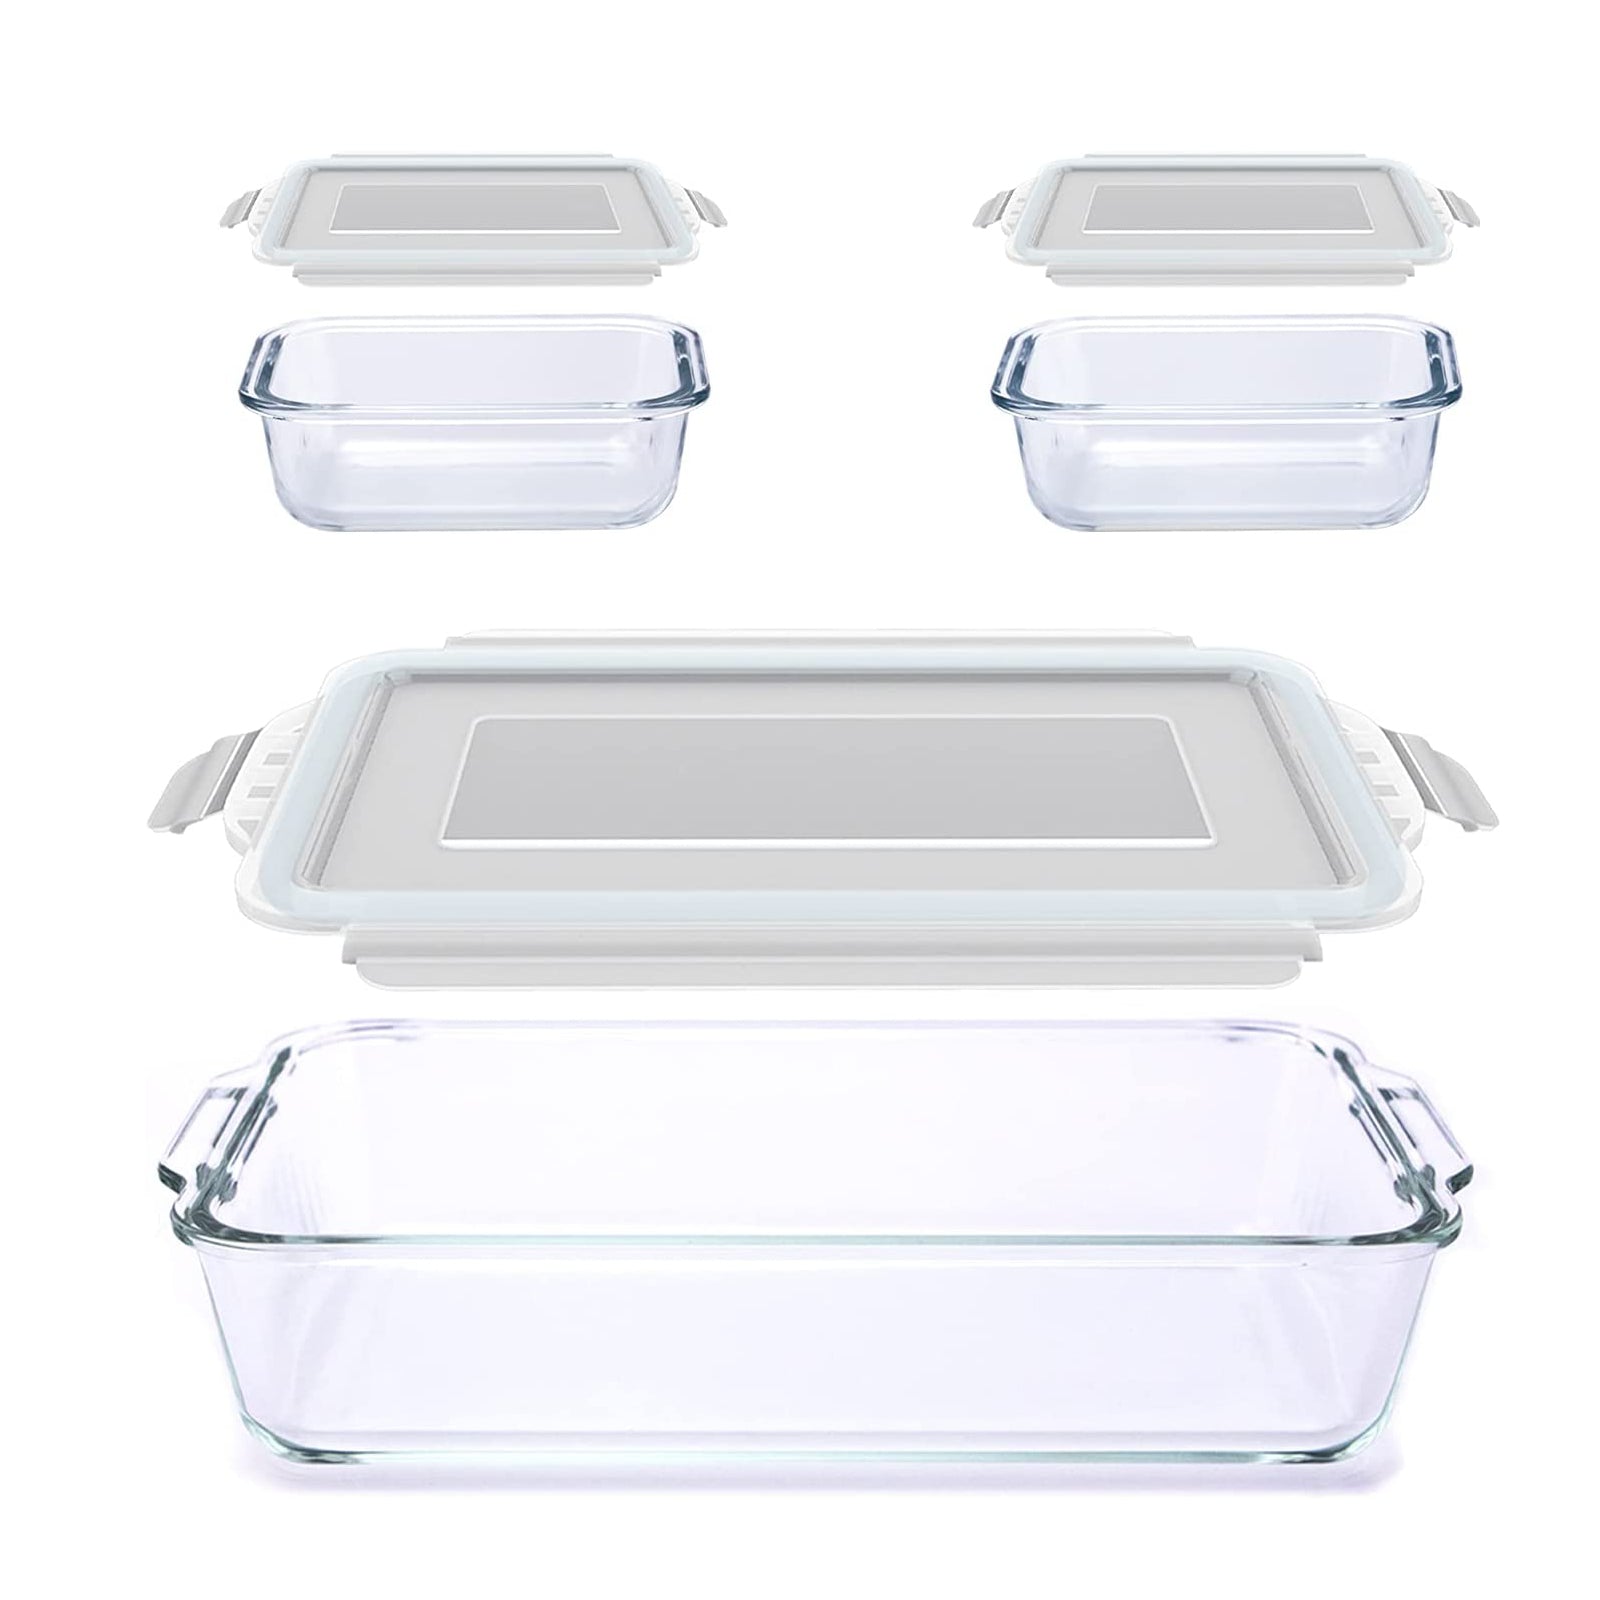 Luvan 8 Piece Glass Baking Dish with Lids, Rectangular Glass Baking Pan  Bakeware Set with BPA Free Lids, Baking Pans with Cover for Lasagna